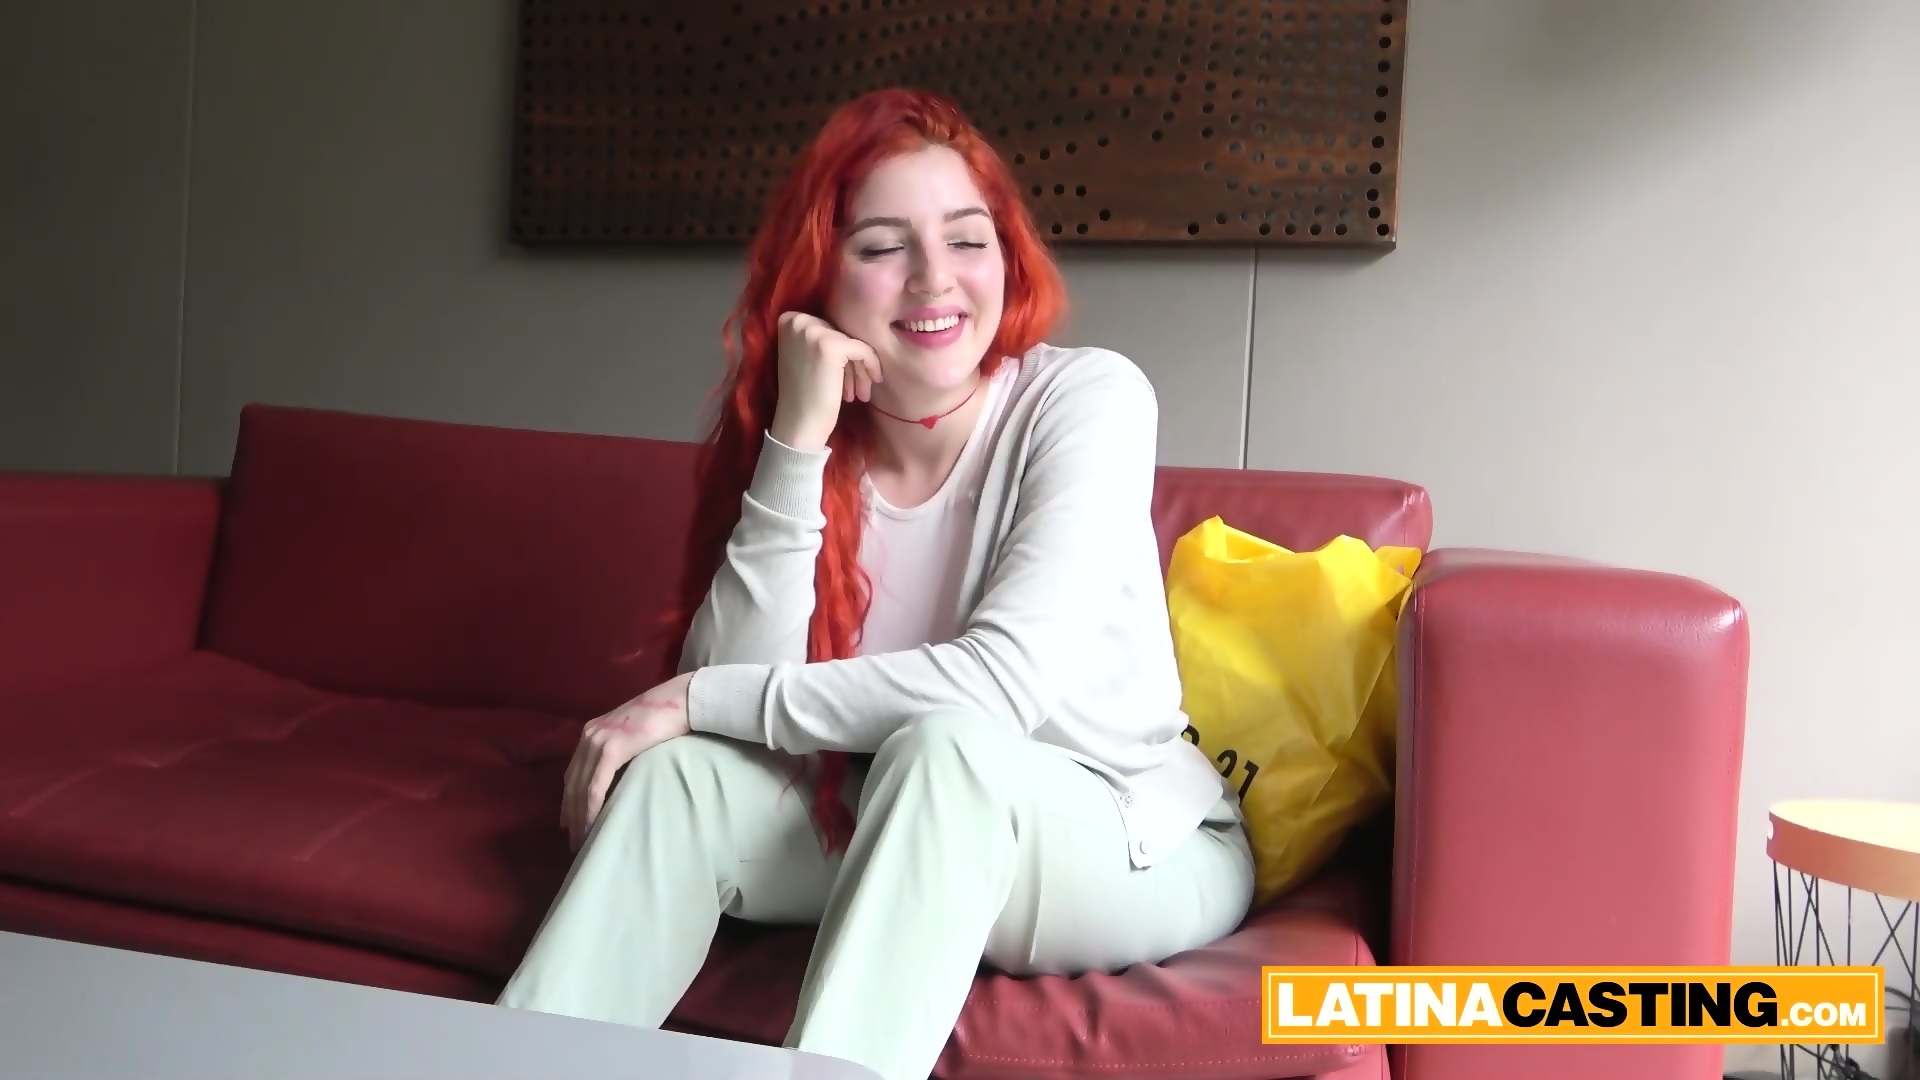 Shy Redhead Latina Teen Fucked Hard In Interview pic image